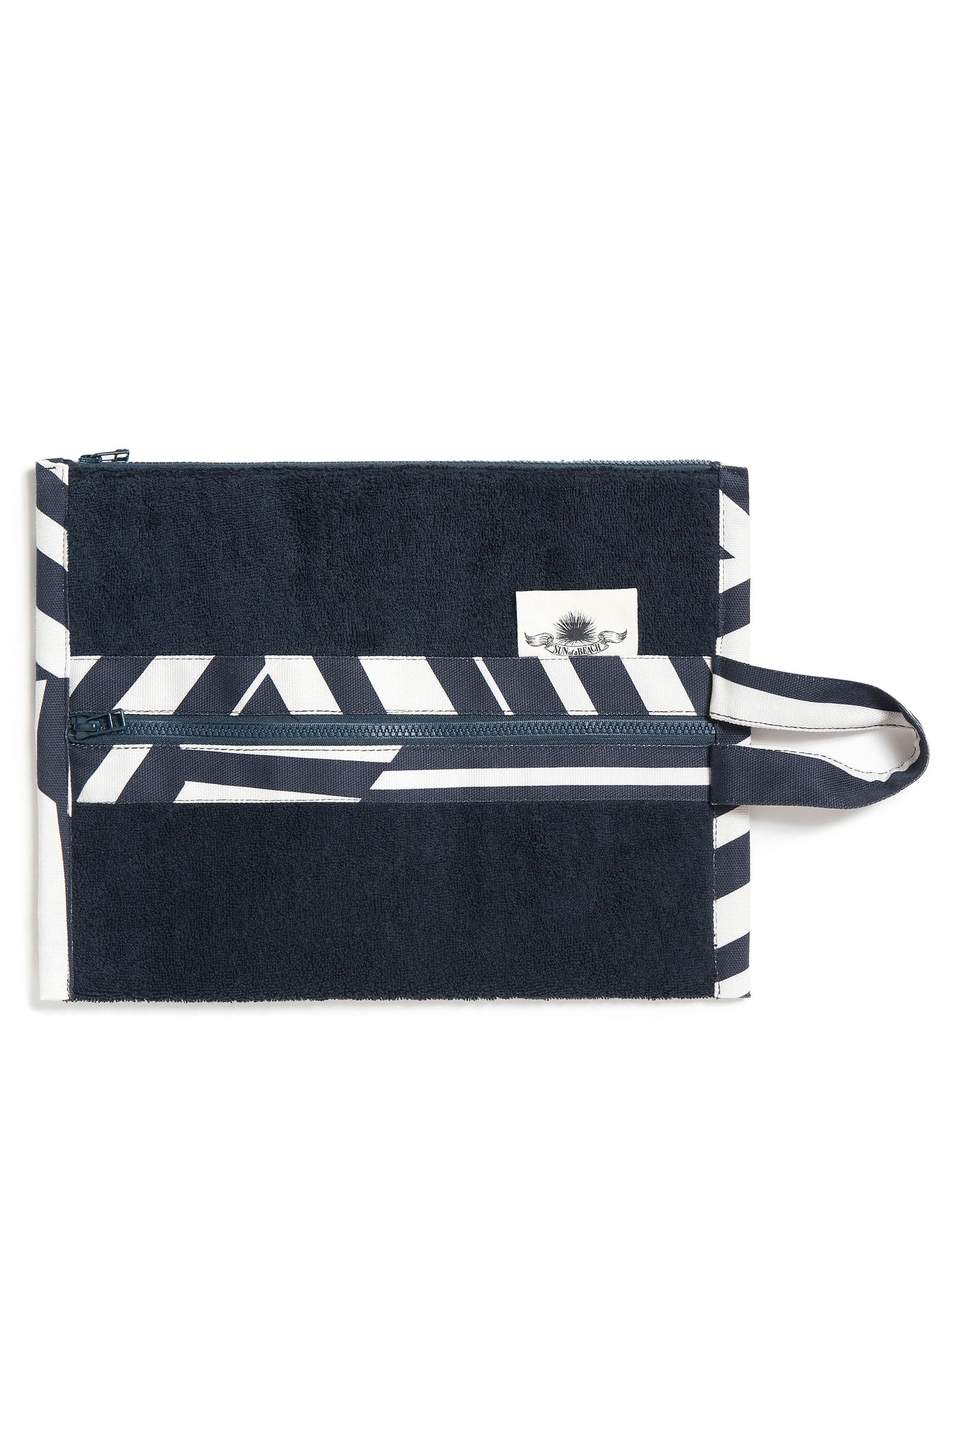 ATHENS TILES DOUBLE WATERPROOF POUCH